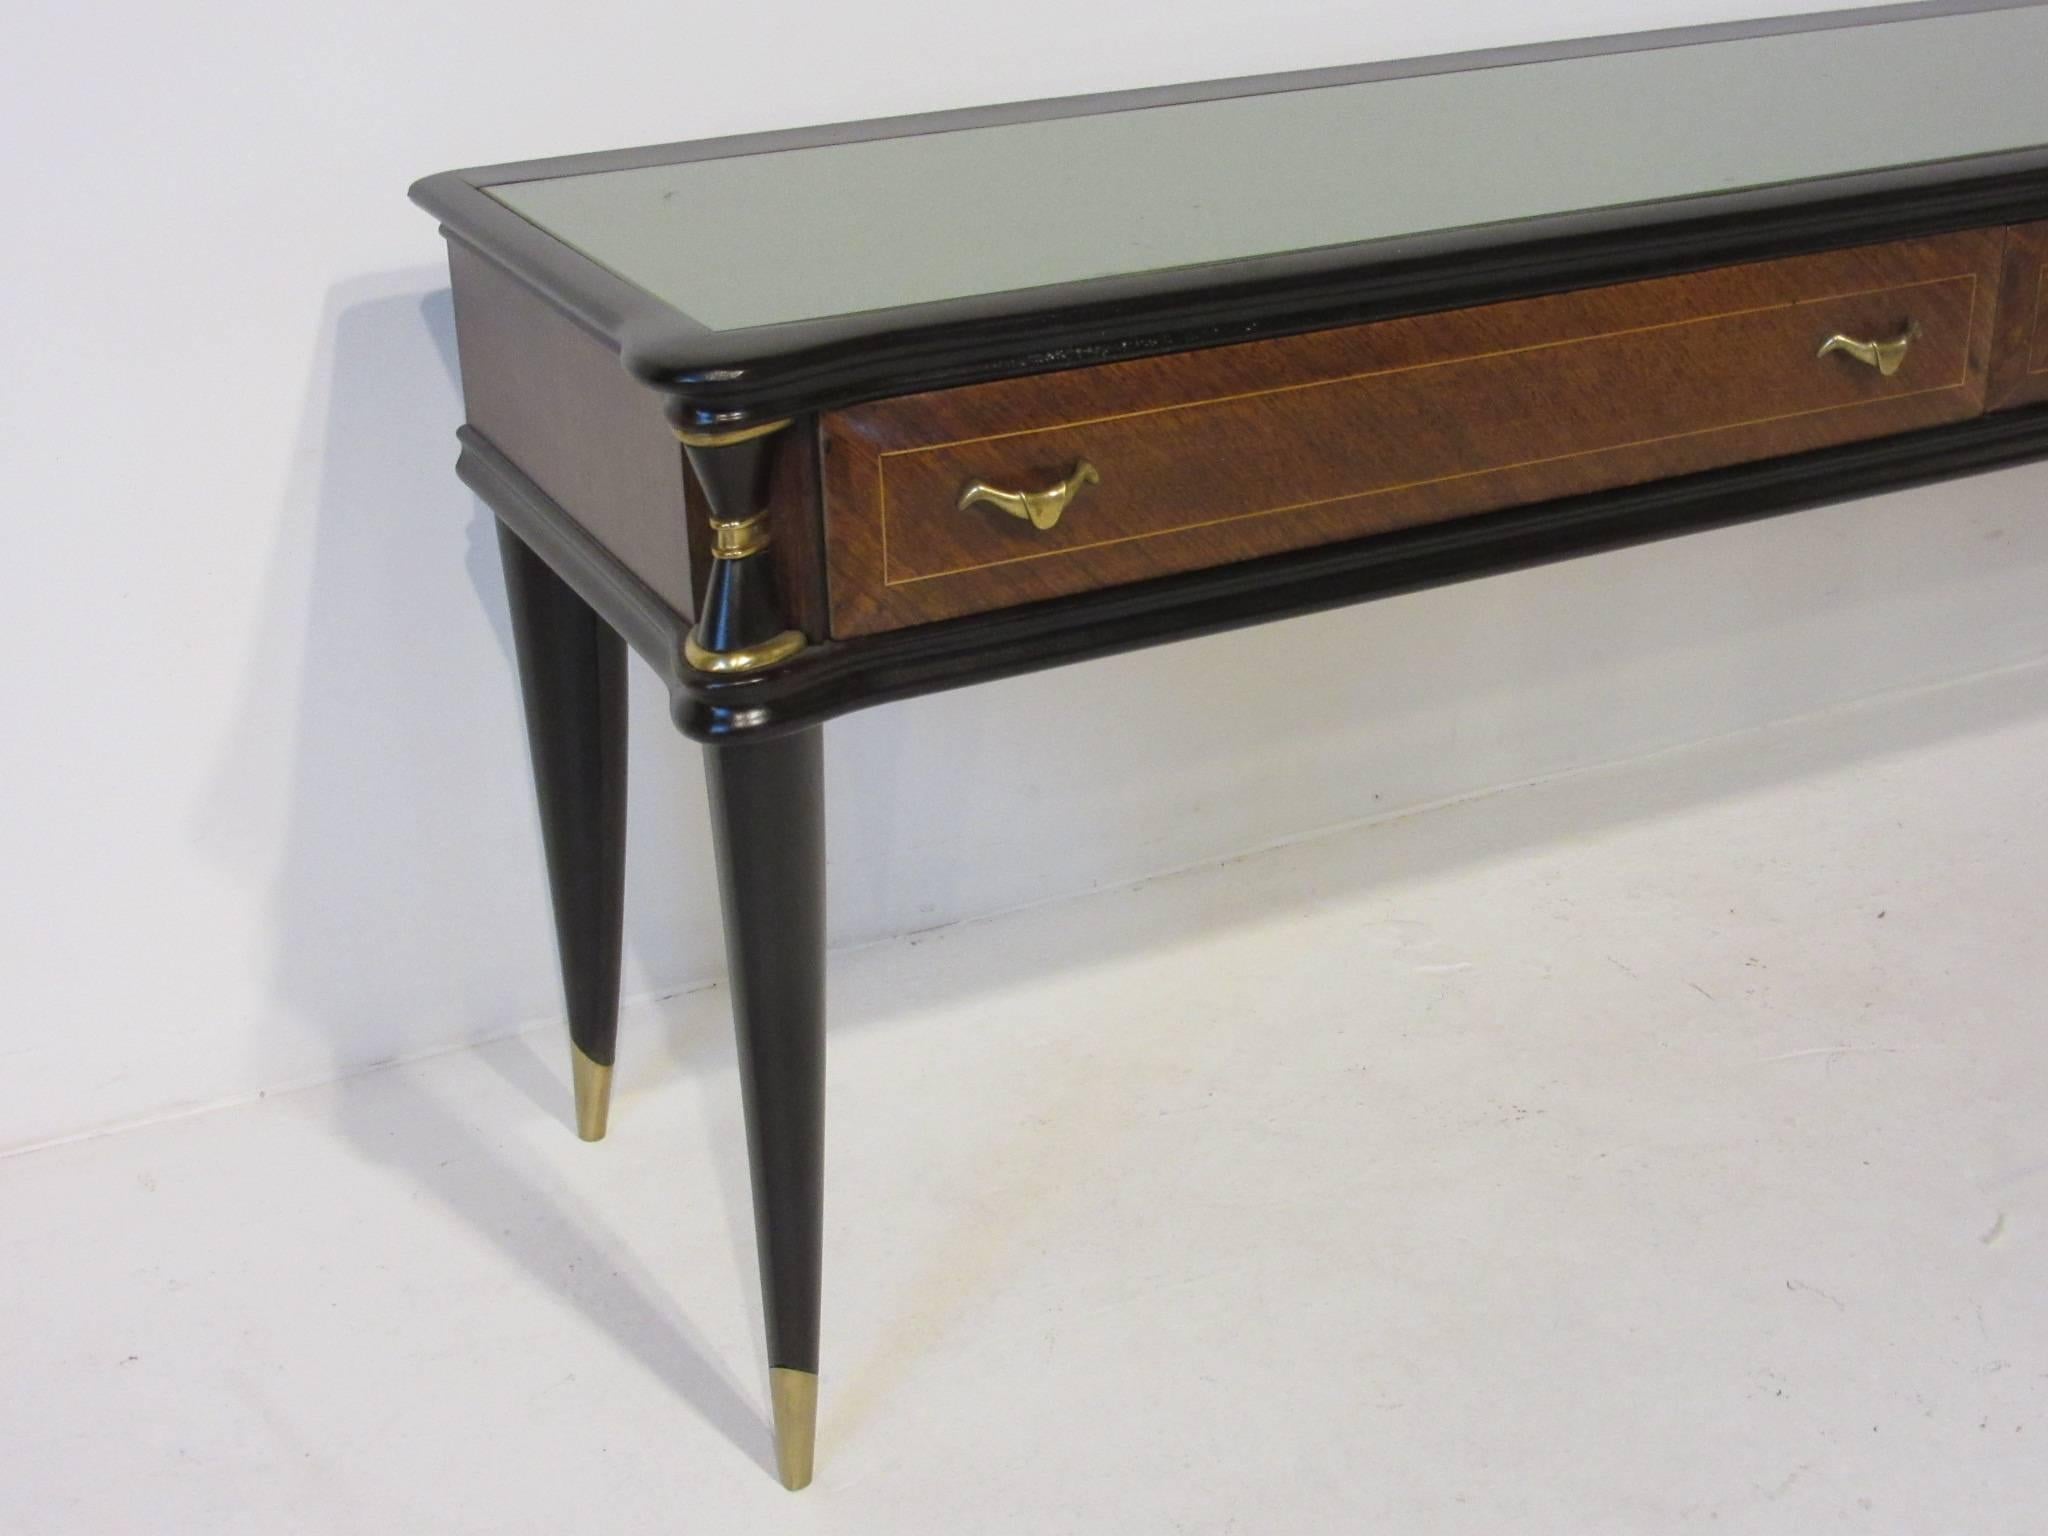 An Italian console table with frosted glass inserted top, brass details, two drawers and walnut with mahogany wood finishes.